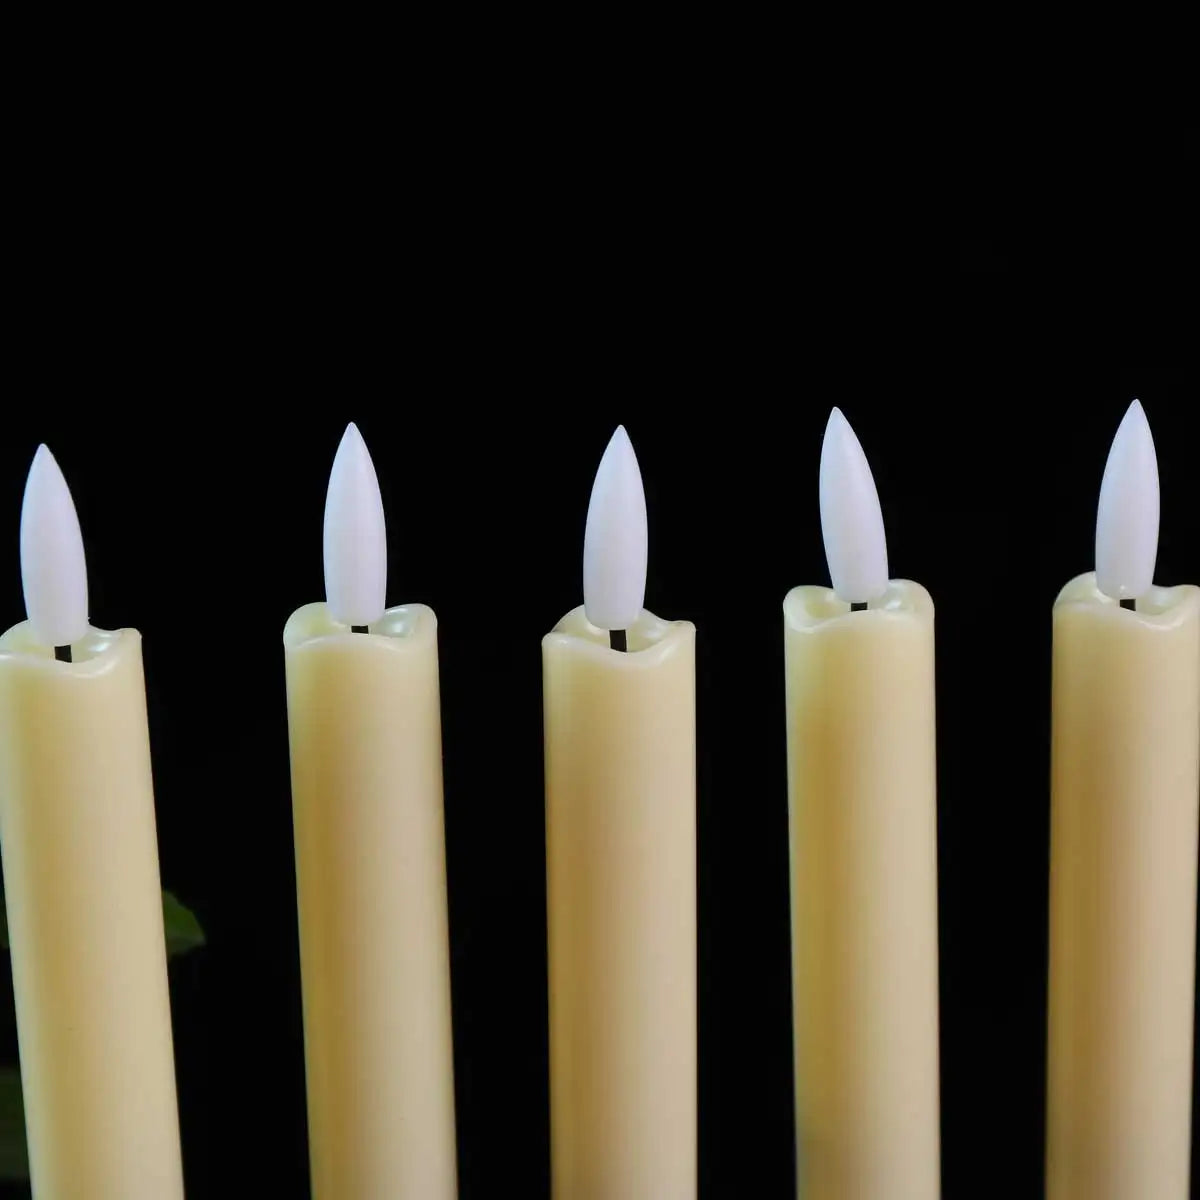 Pack of 2 Black Flameless 6.5 inch/16.5 cm Short LED Taper Candles For Halloween,Battery Operated Powered White/Beige LED Candle